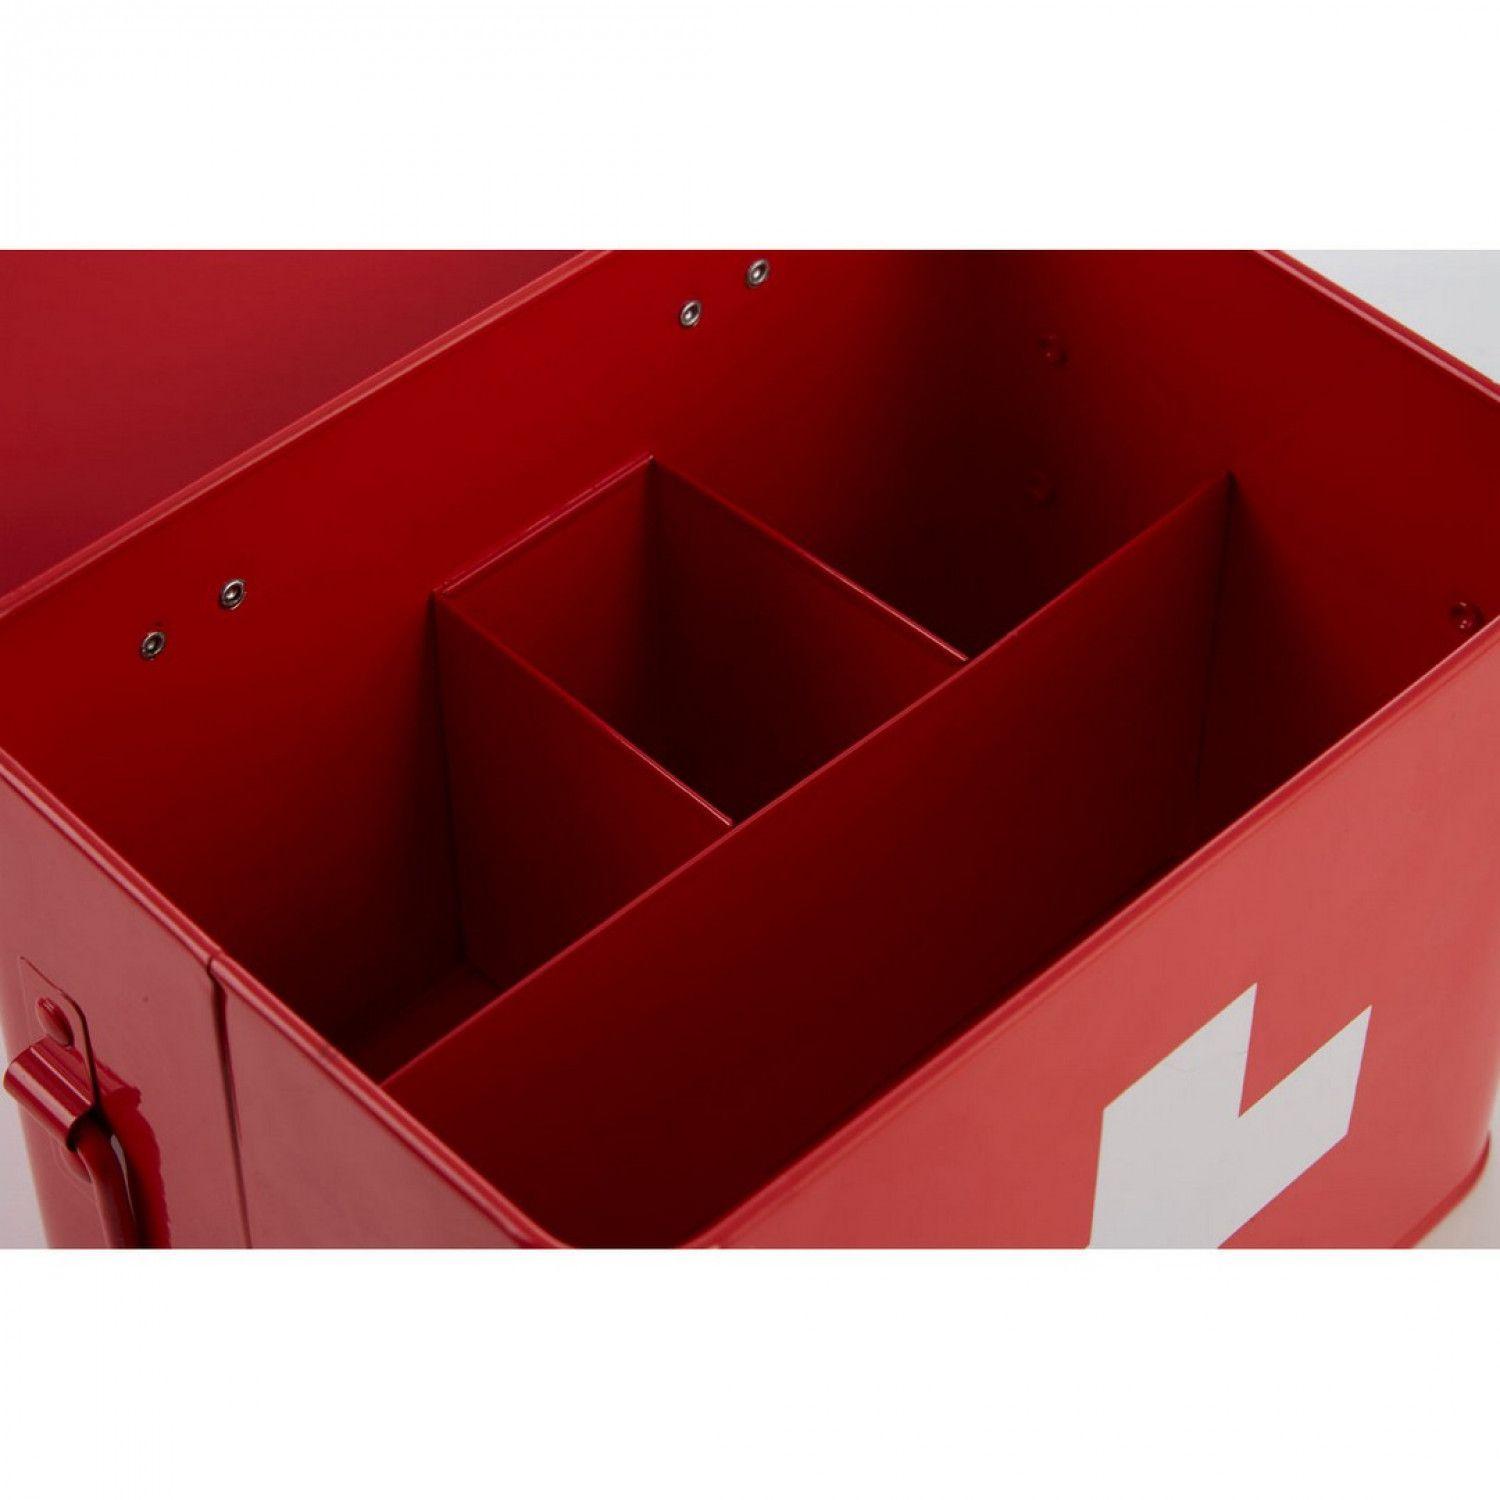 Red Triangle with White Cross Logo - Own This Bonsoni Red White Cross Medicine First Aid Box By Protege